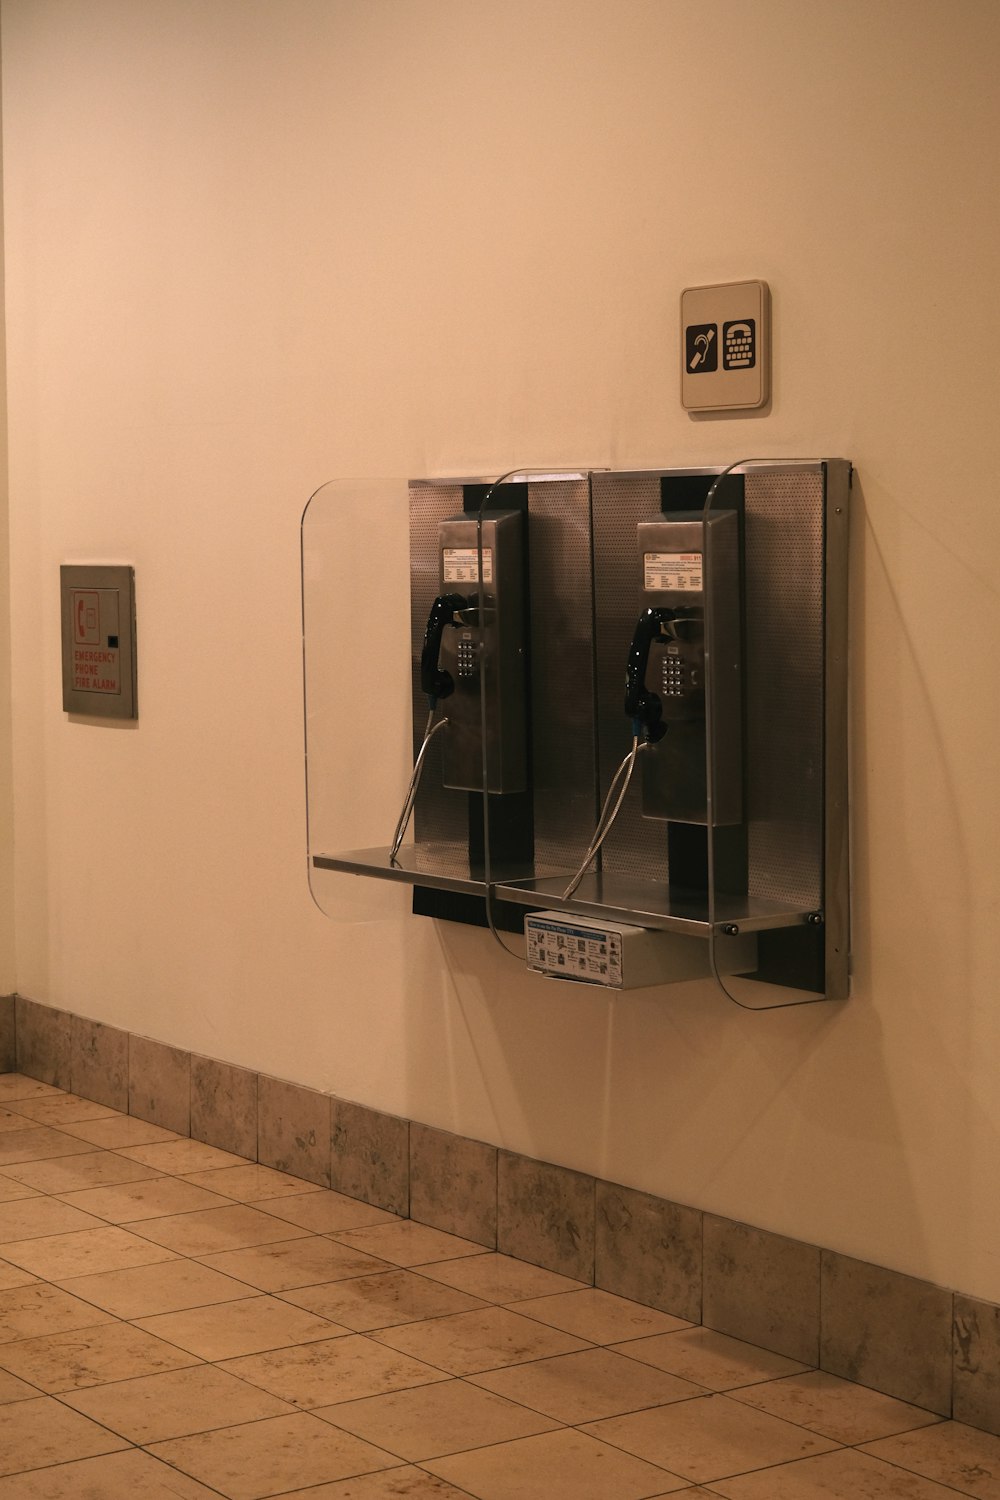 a wall mounted public phone next to a tiled floor